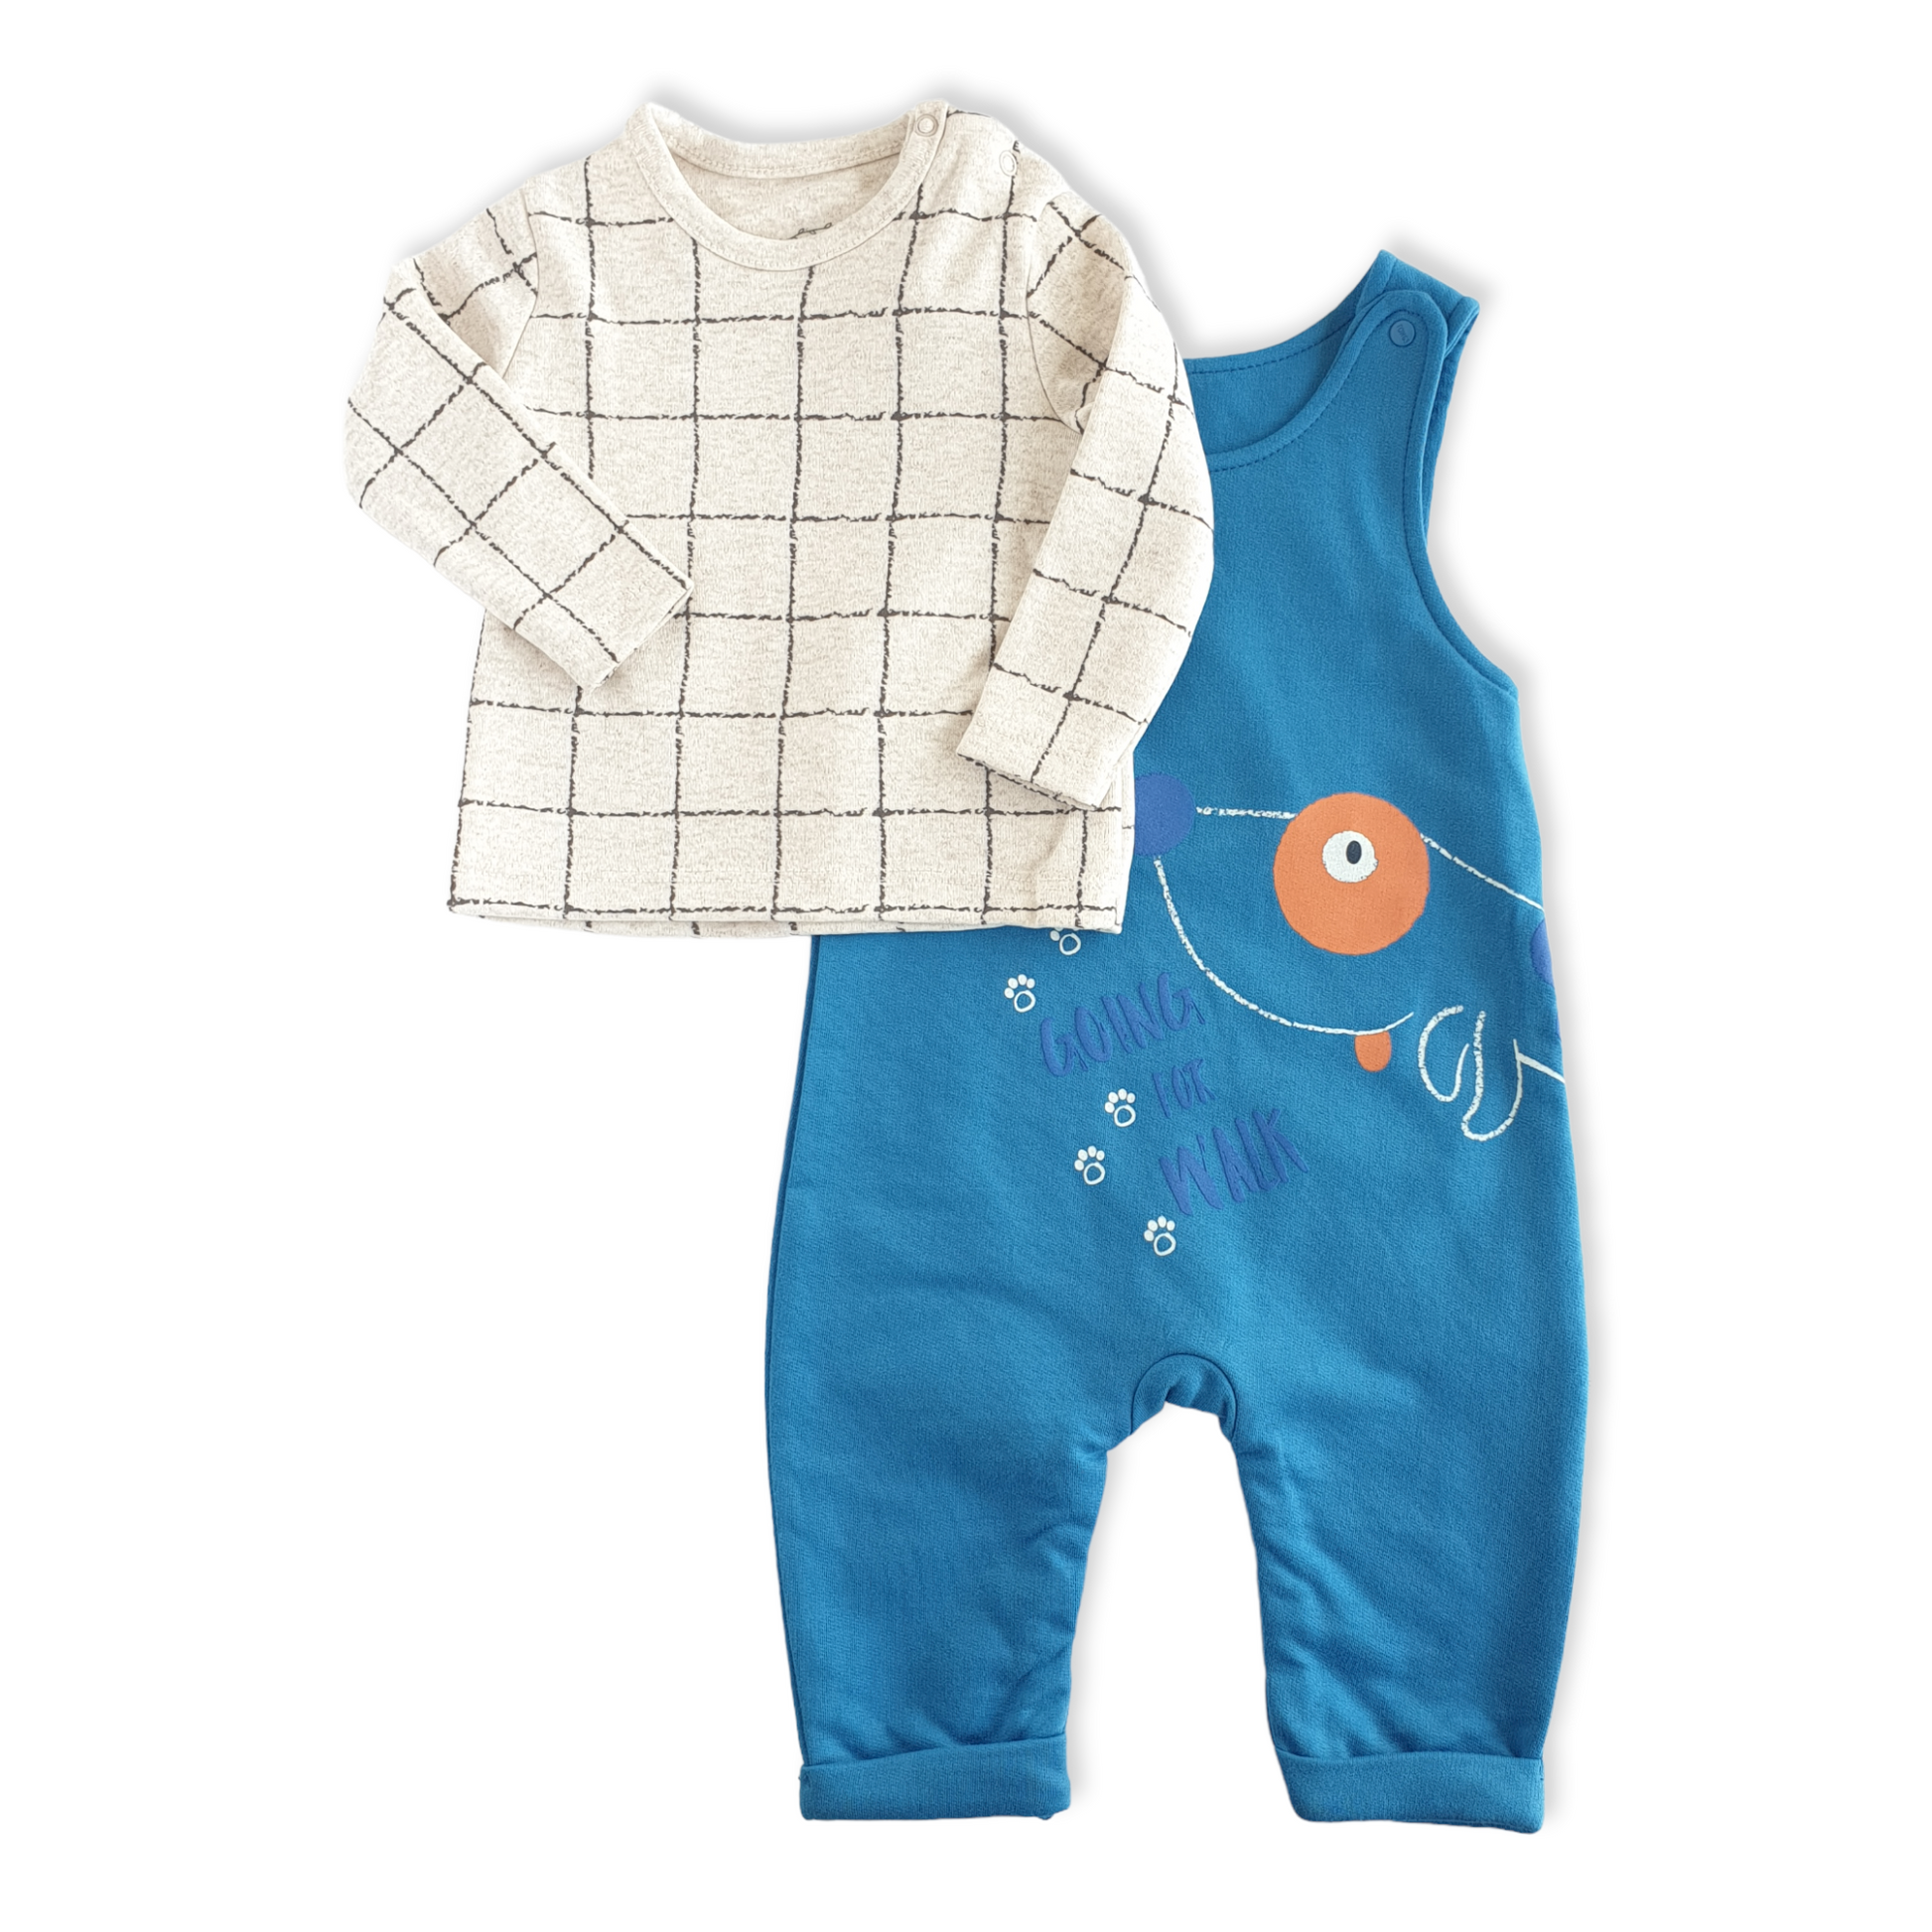 Blue Going for Walk Baby Boy Overall Set-Beige, Blue, Boy, Brown, catboy, Dog, Footless, Footprint, Long Sleeve, Orange, Overall, Salopette, Shirt, Top, Walk-Tongs-[Too Twee]-[Tootwee]-[baby]-[newborn]-[clothes]-[essentials]-[toys]-[Lebanon]